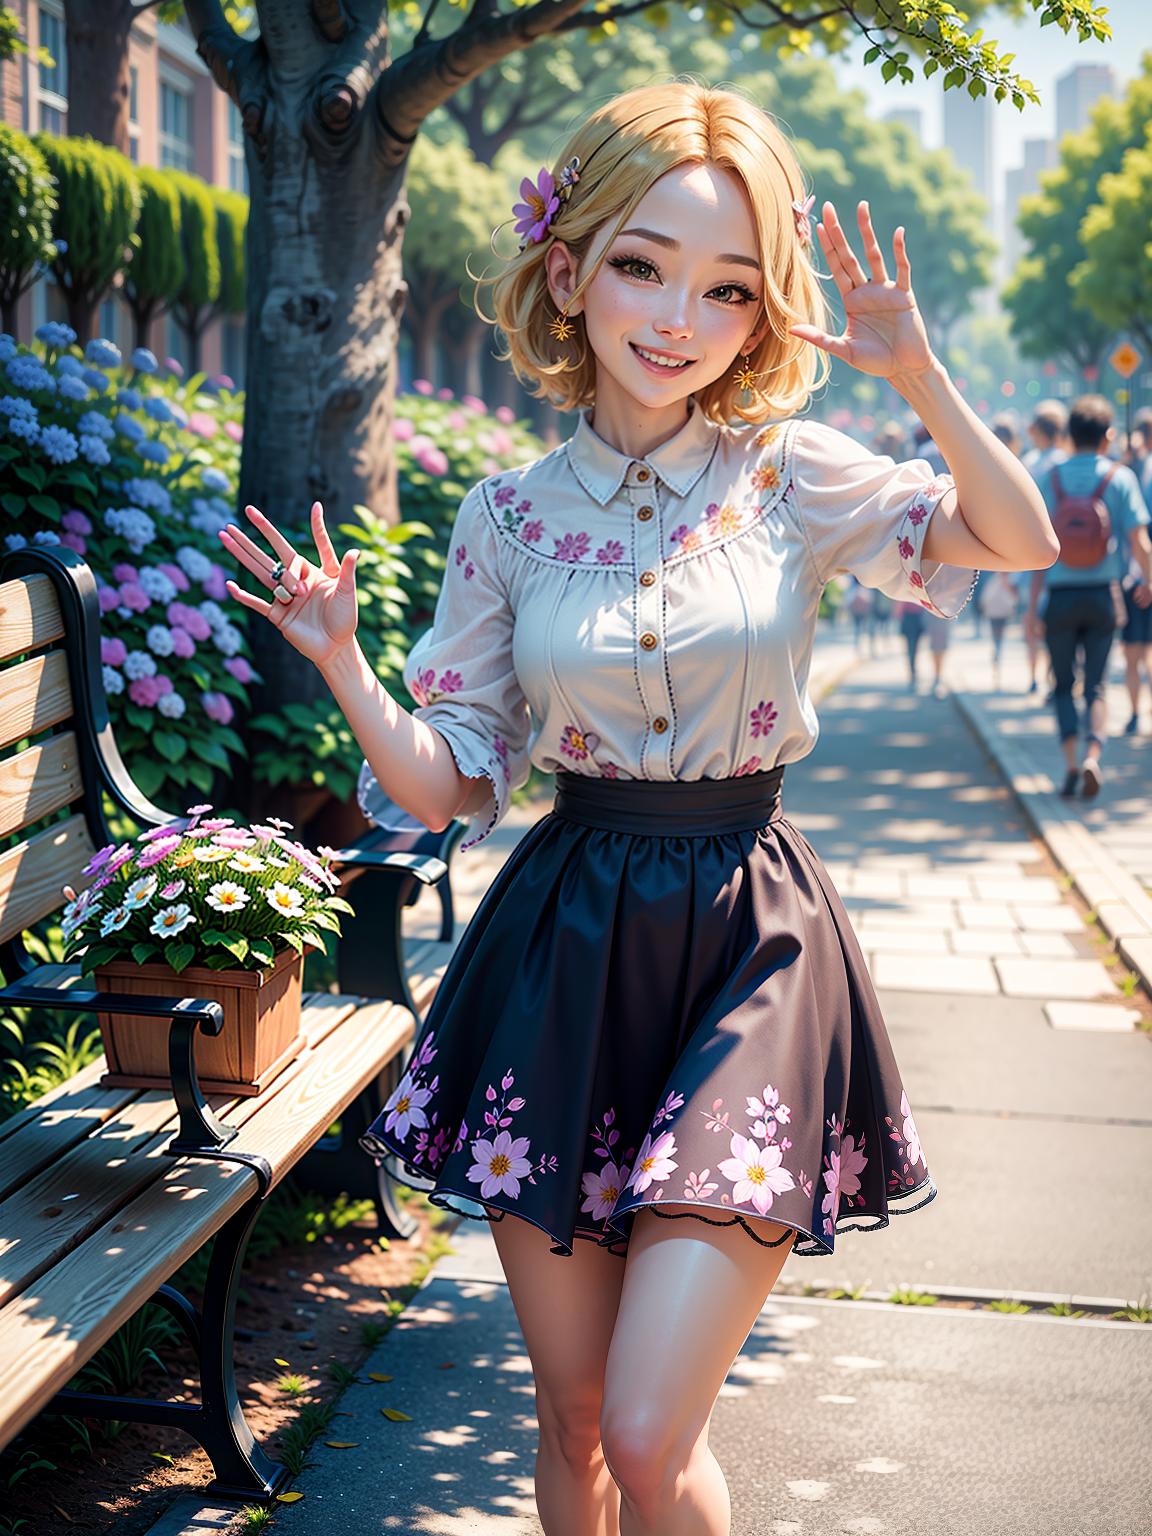  master piece, best quality, ultra detailed, highres, 4k.8k, Happy person, Waving hello to someone, Friendly smile, BREAK Positive greeting, Park, Bench, trees, flowers, birds, BREAK Sunny and cheerful, Warm and inviting ambiance, crystallineAI